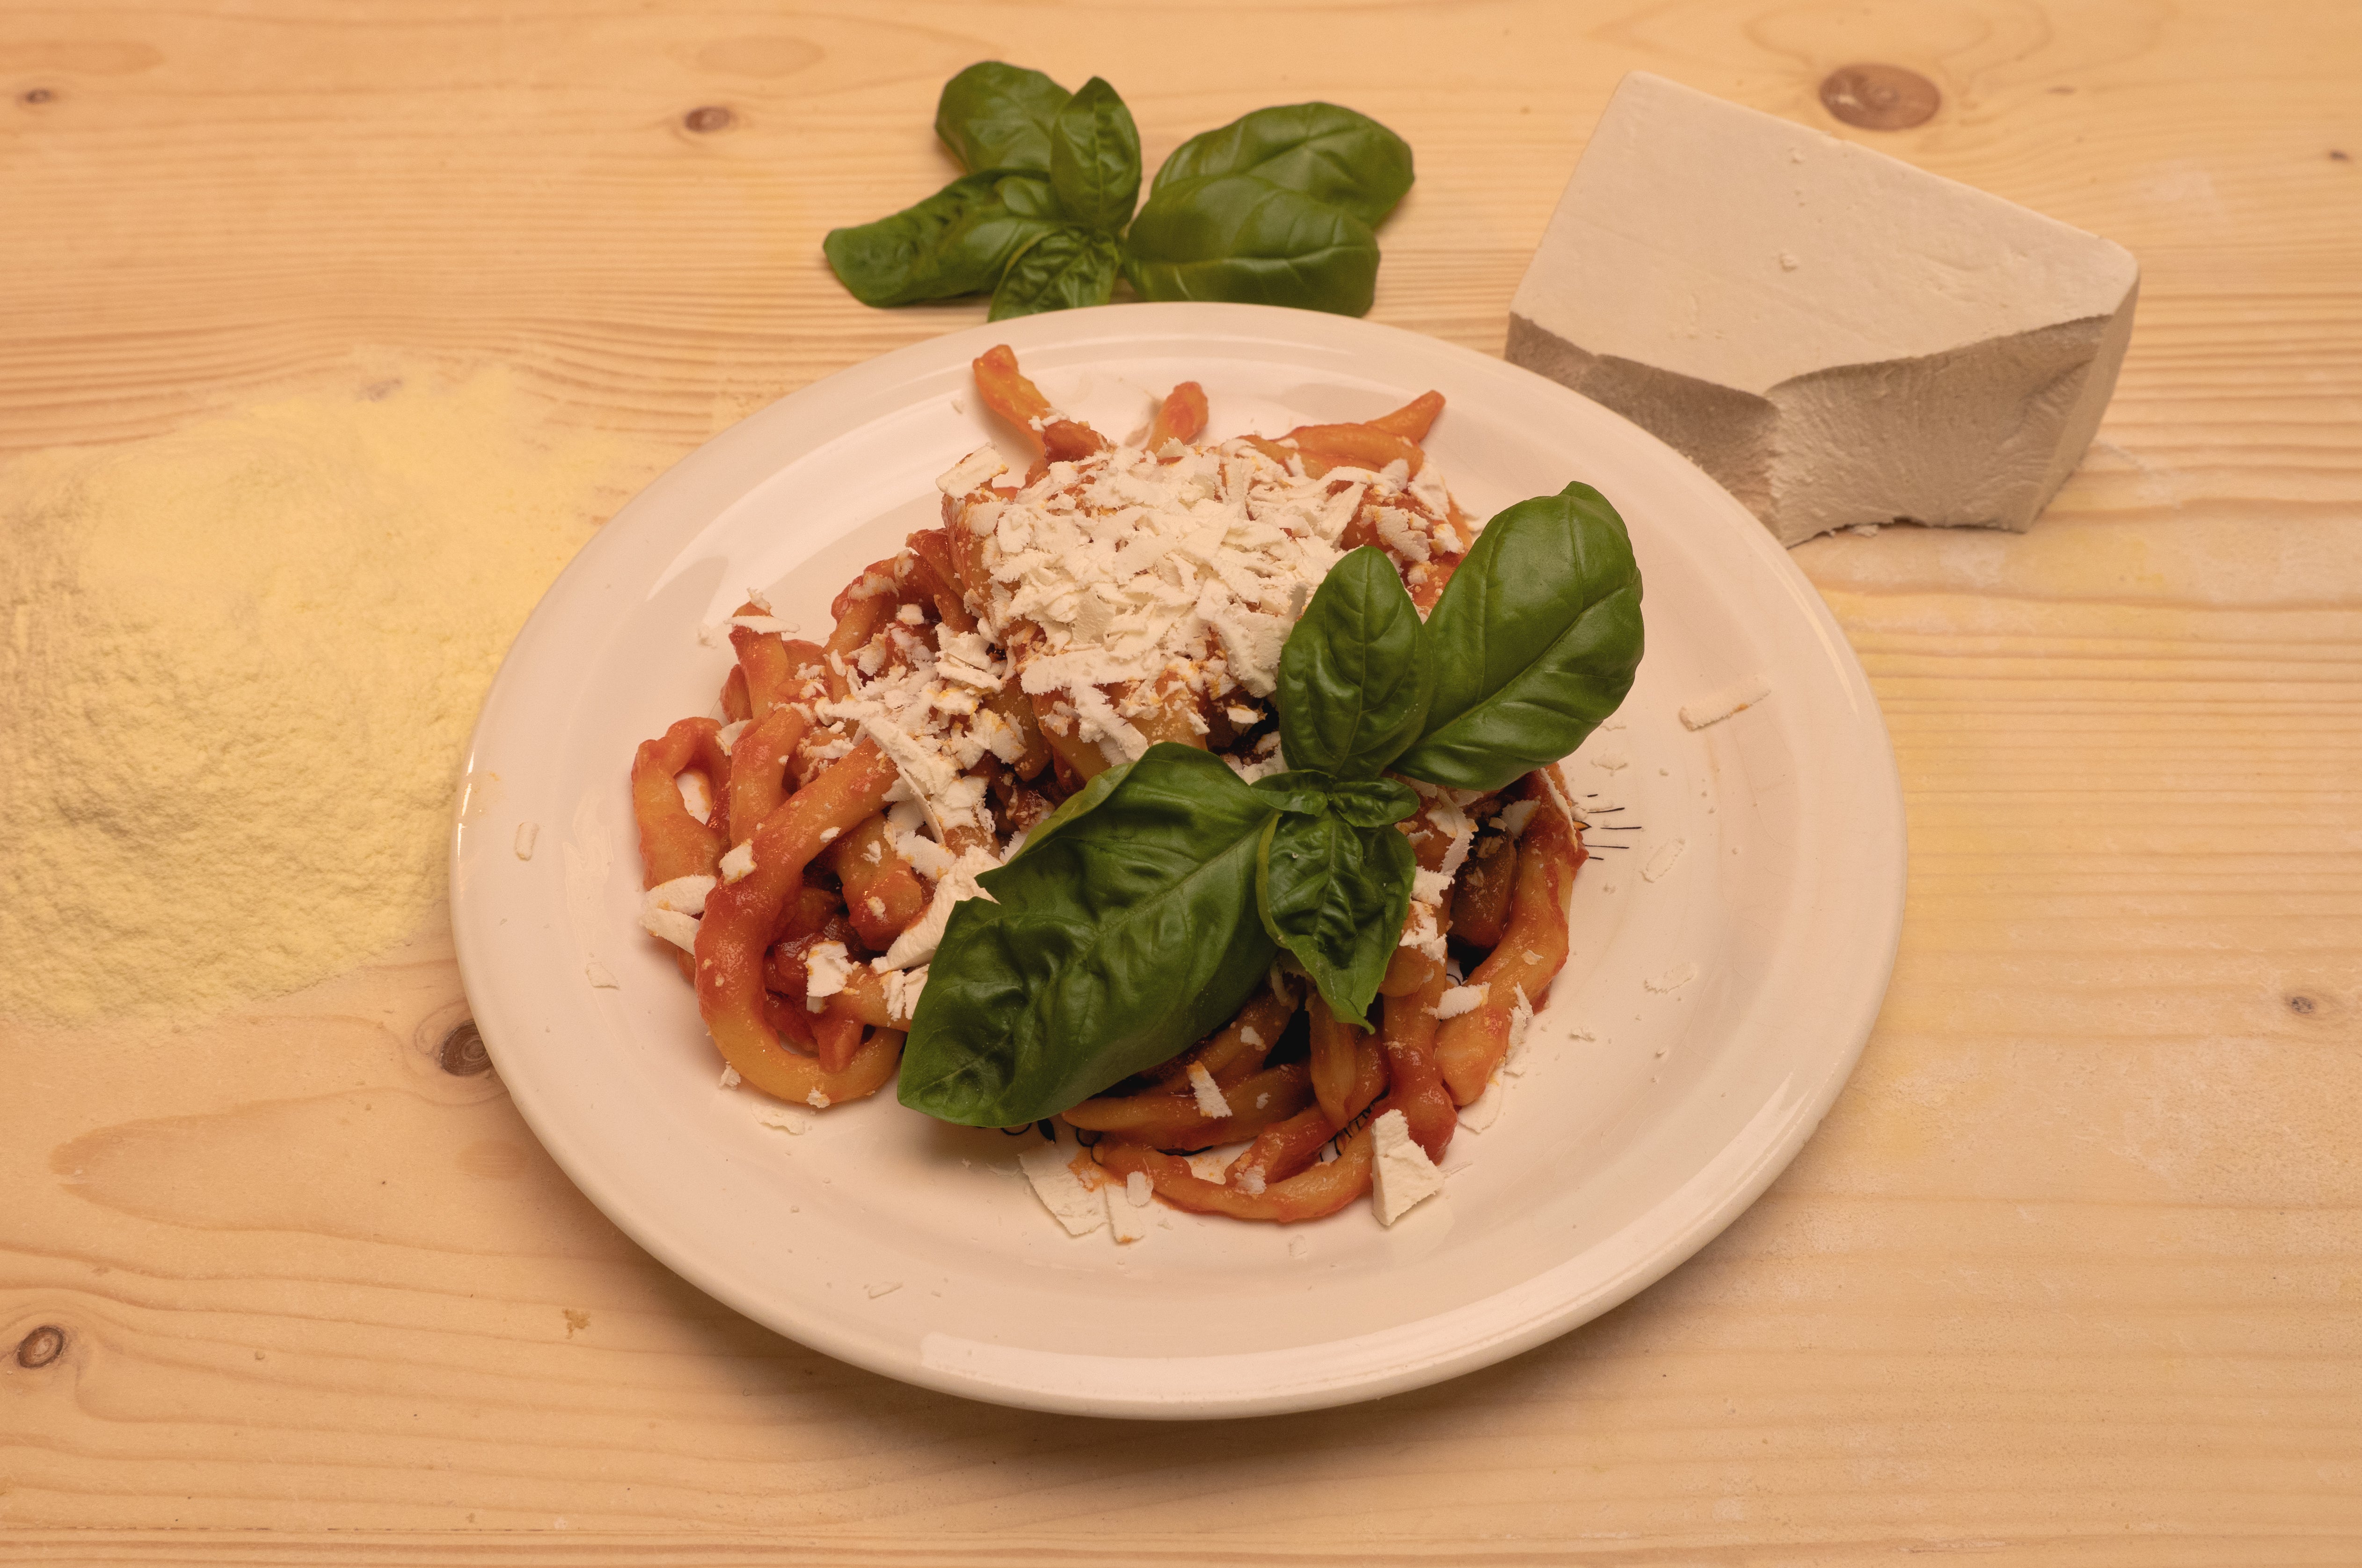 Nonna Live Summer Tour - Two Special Weekend Pasta Classes! Eat Your Way Through Italy!